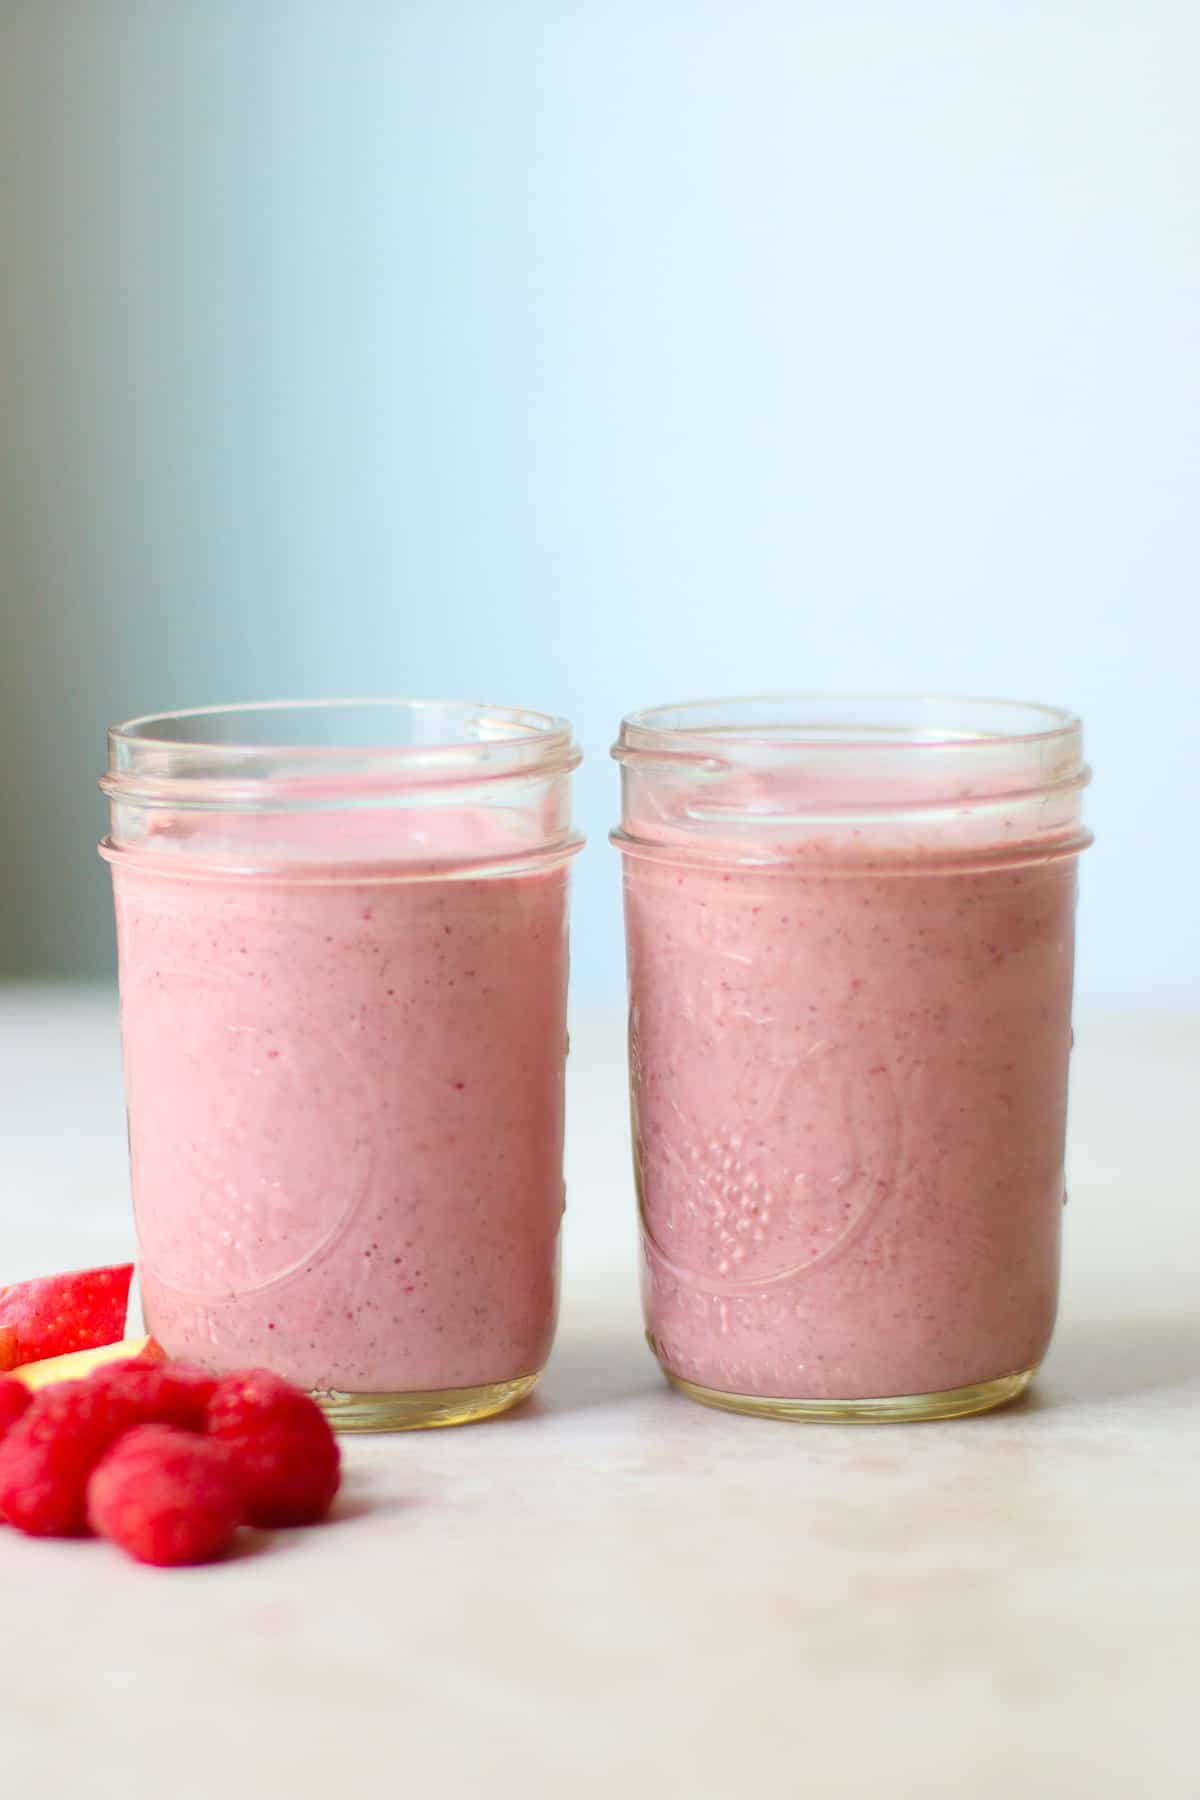 Two glasses of fiber smoothie.